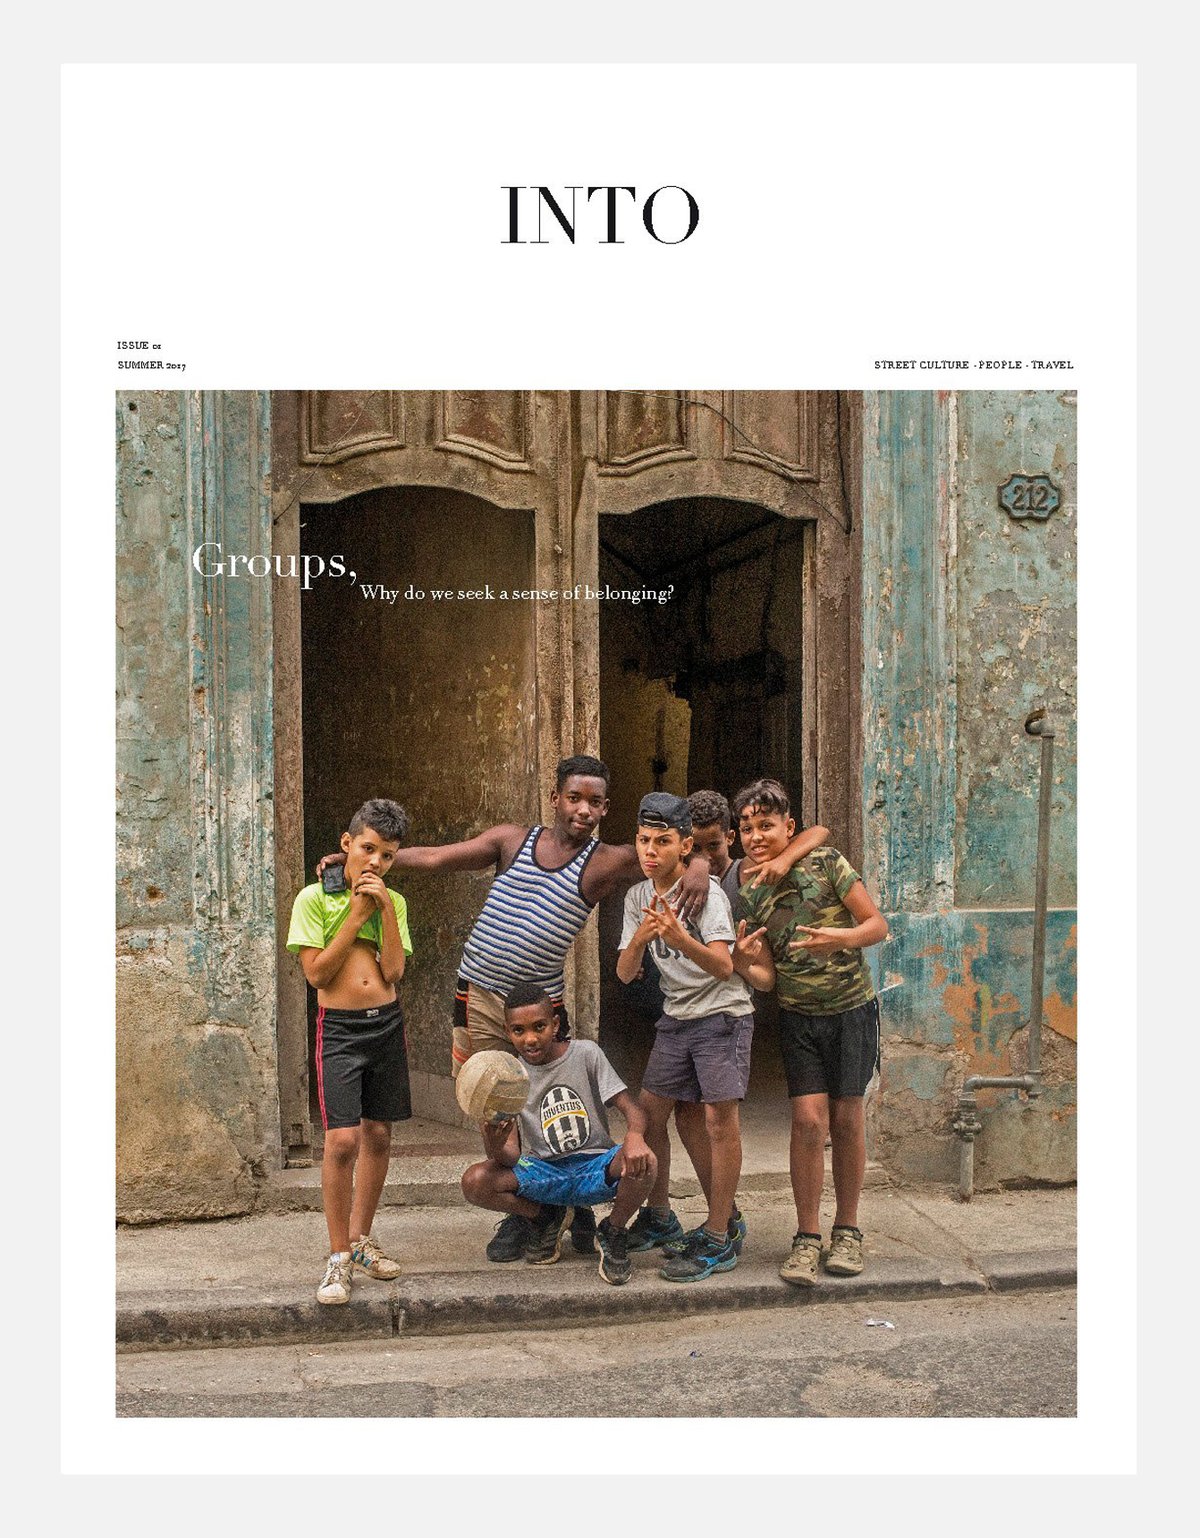 Image of INTO magazine, edition n1 - GROUPS, why do we seek a sense of belonging?